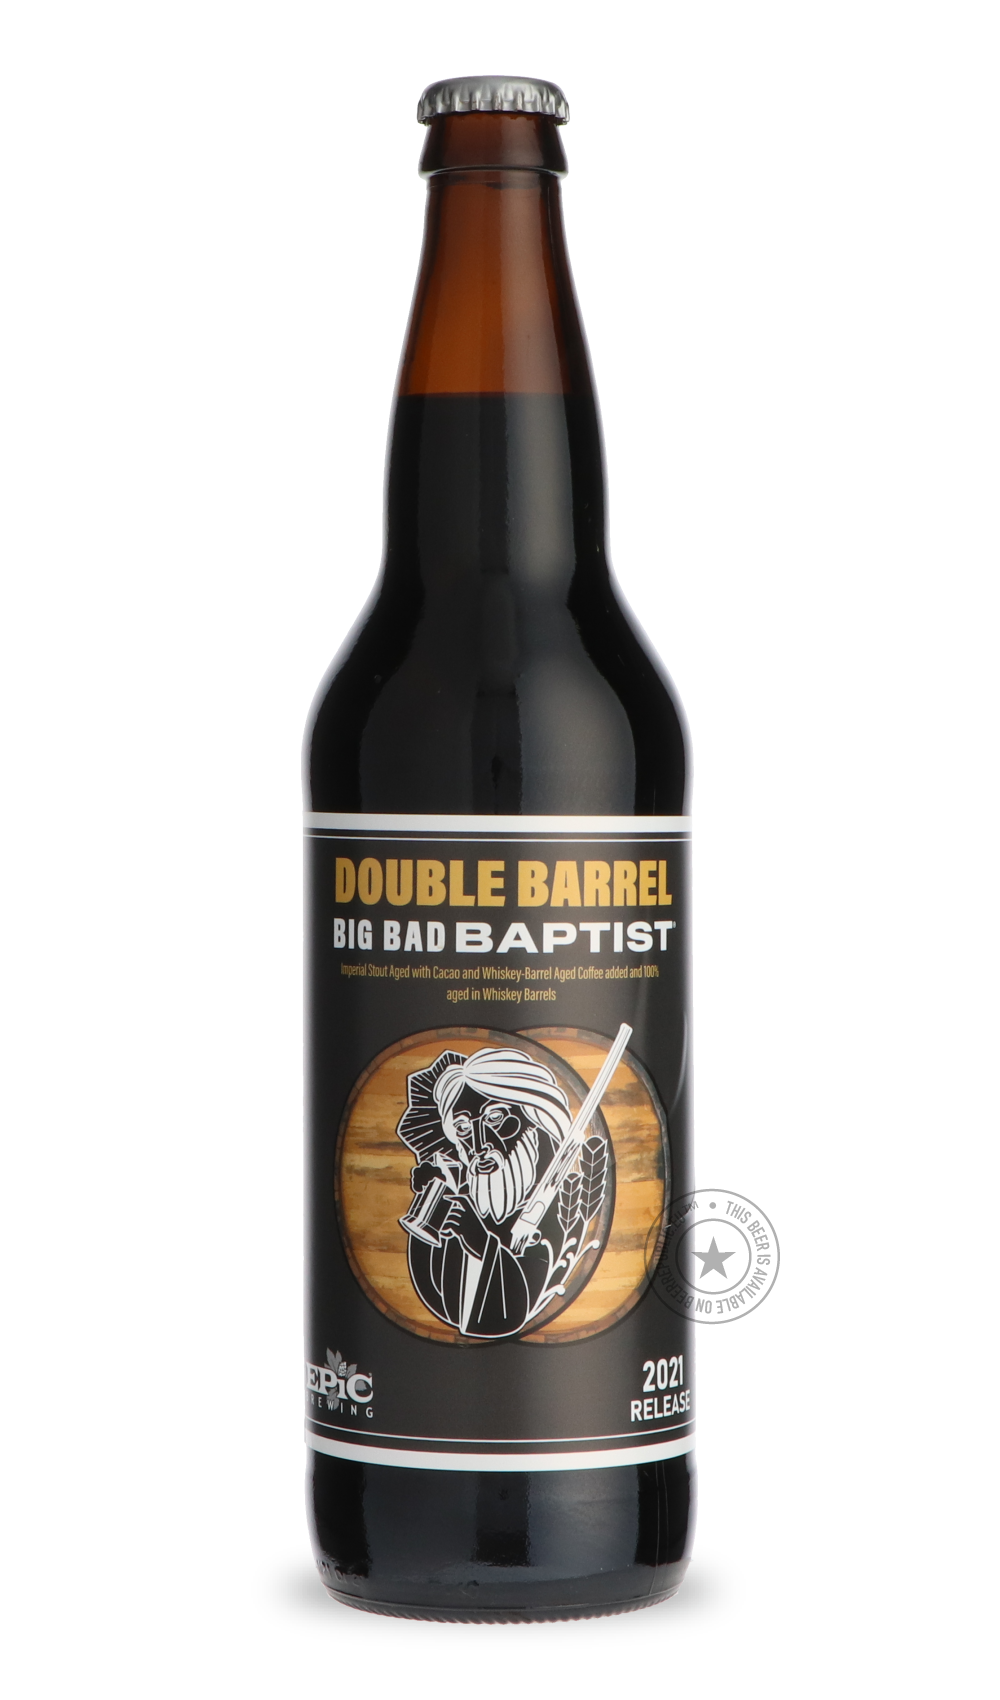 -Epic- Double Barrel Big Bad Baptist 2021-Stout & Porter- Only @ Beer Republic - The best online beer store for American & Canadian craft beer - Buy beer online from the USA and Canada - Bier online kopen - Amerikaans bier kopen - Craft beer store - Craft beer kopen - Amerikanisch bier kaufen - Bier online kaufen - Acheter biere online - IPA - Stout - Porter - New England IPA - Hazy IPA - Imperial Stout - Barrel Aged - Barrel Aged Imperial Stout - Brown - Dark beer - Blond - Blonde - Pilsner - Lager - Wheat